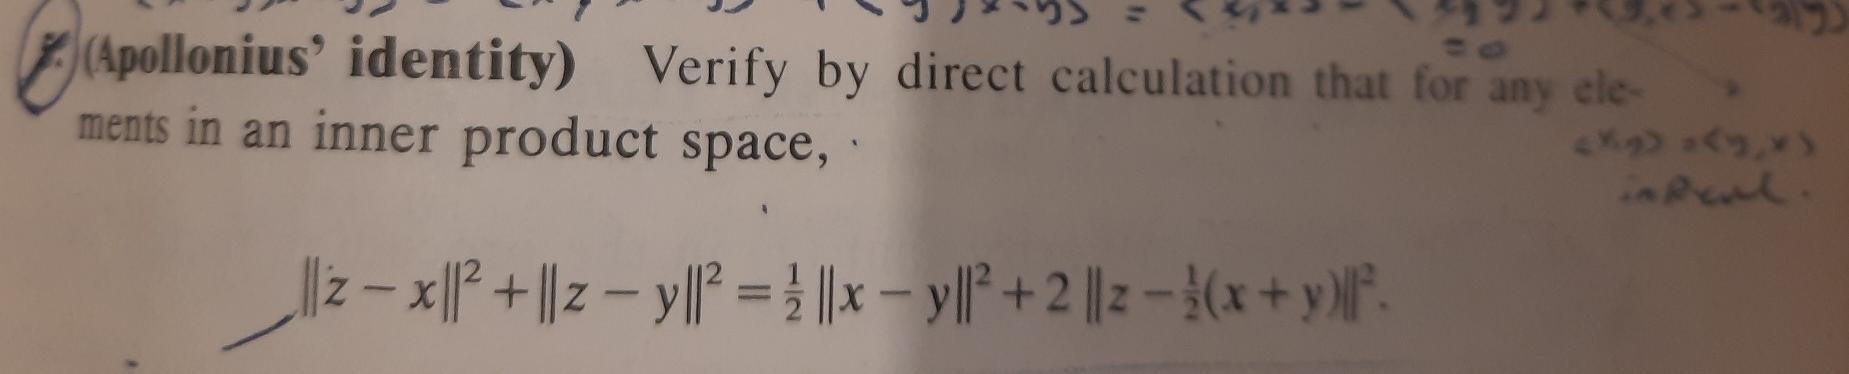 Apollonius Identity Verify By Direct Calculation That For Any Ele Ments In An Inner Product Space 2 X Z 1